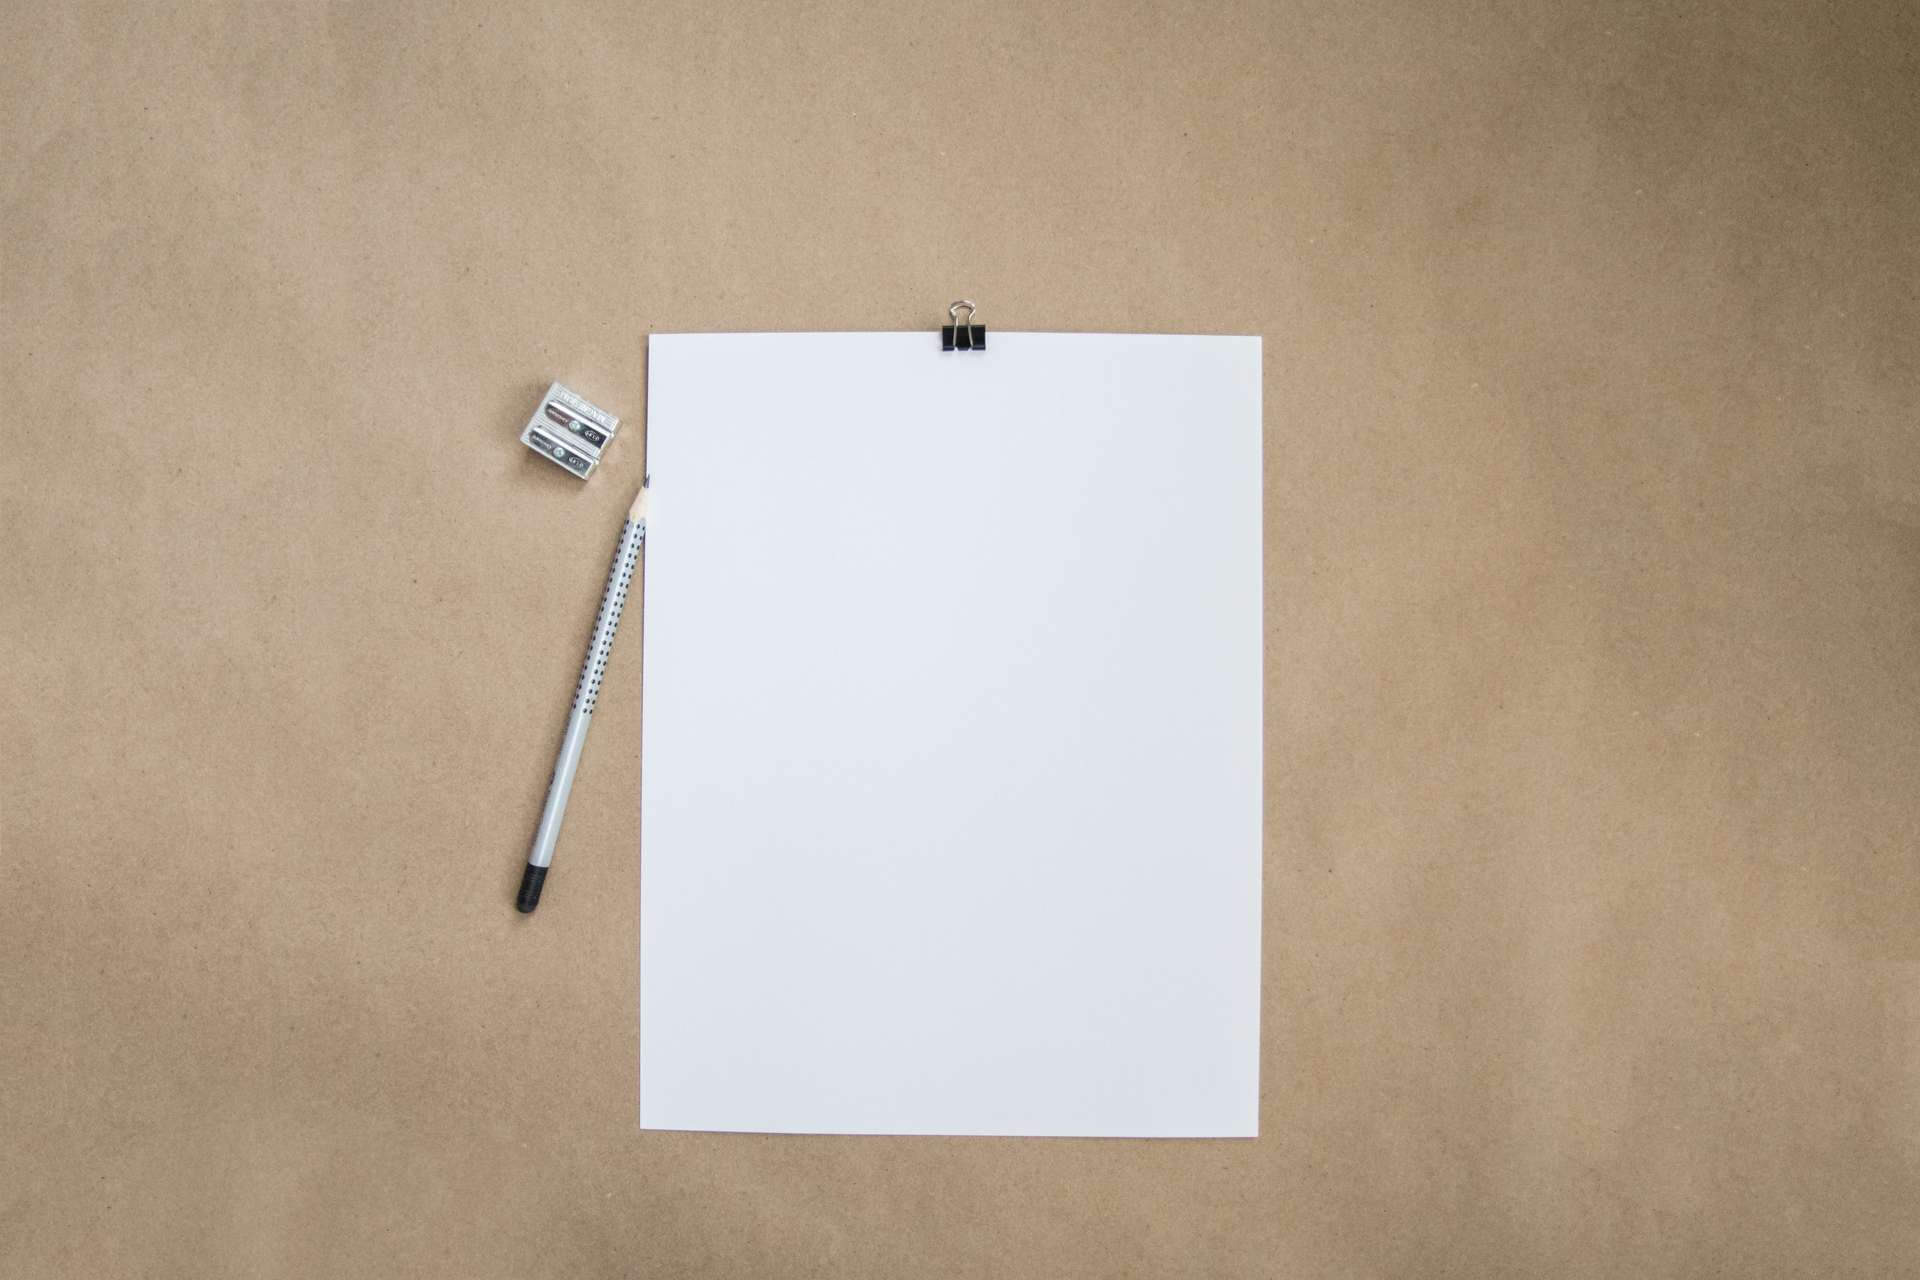 A blank piece of paper with pencil